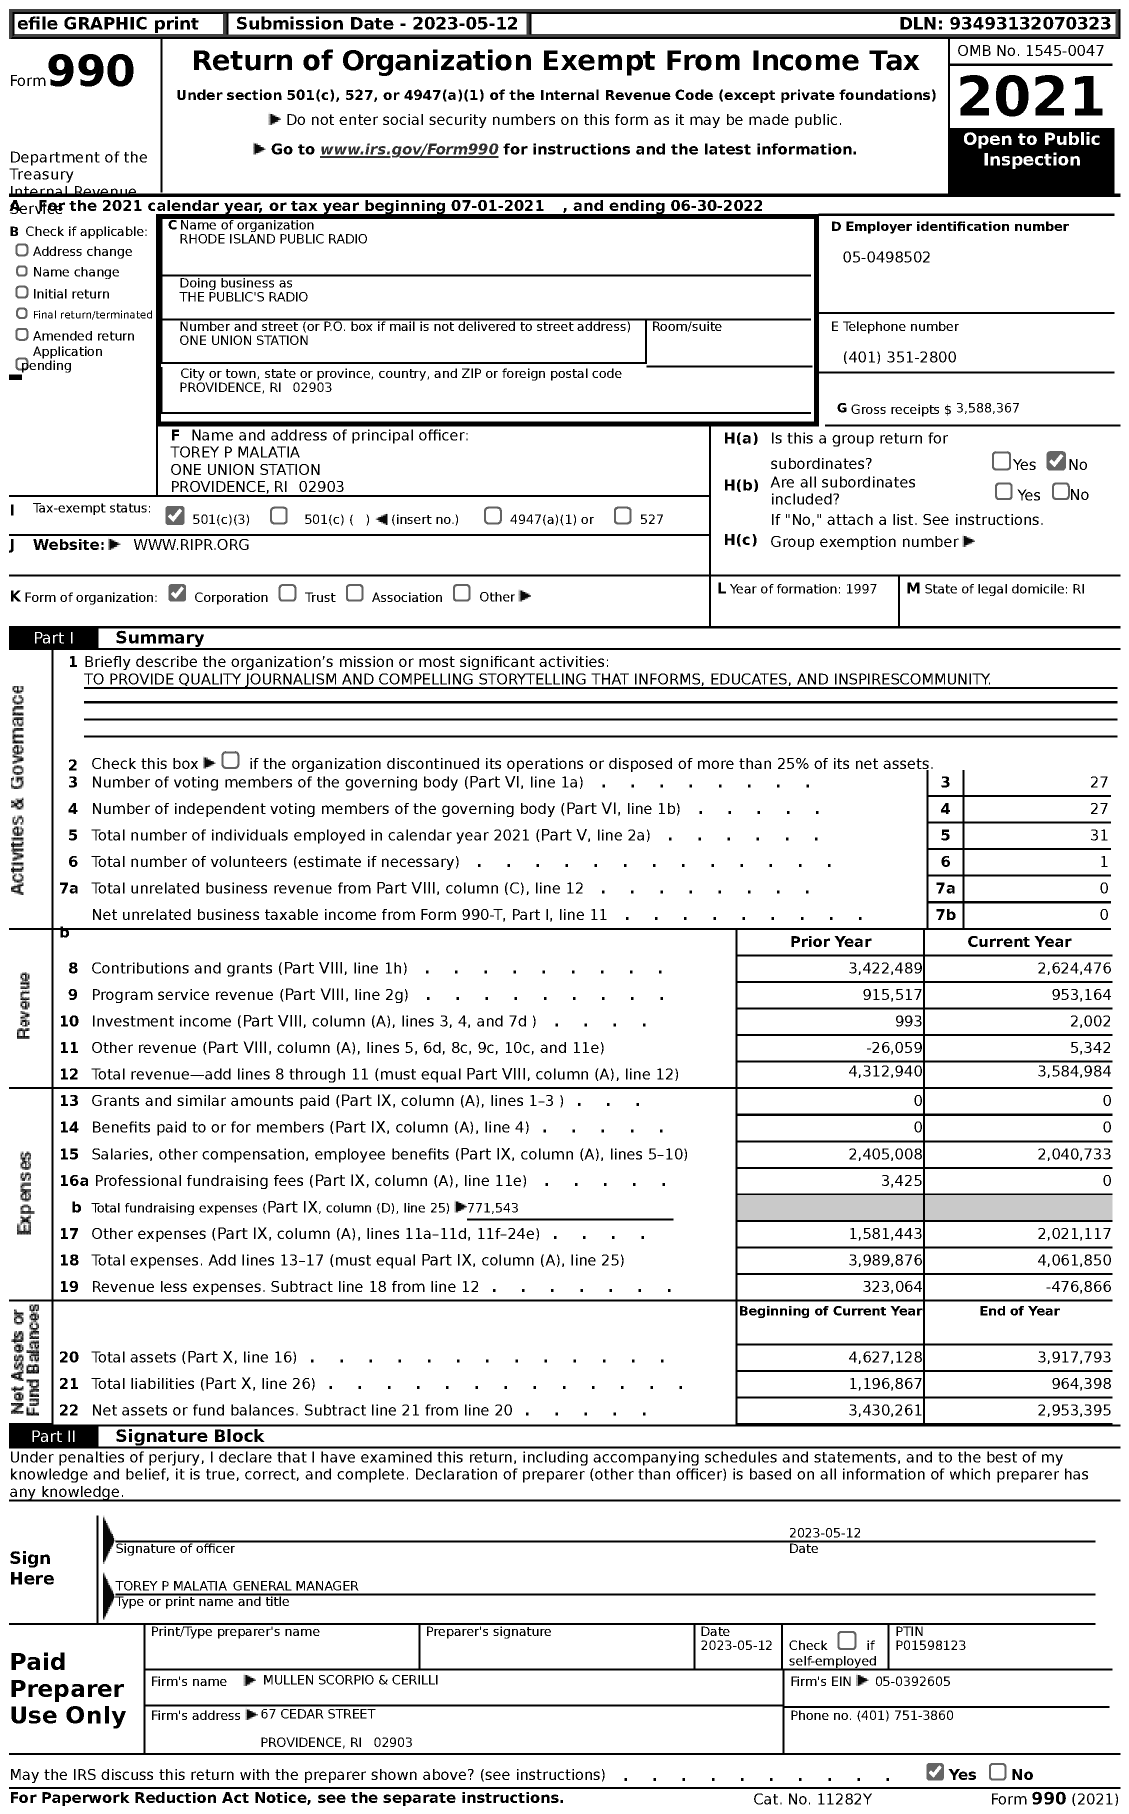 Image of first page of 2021 Form 990 for The Public's Radio